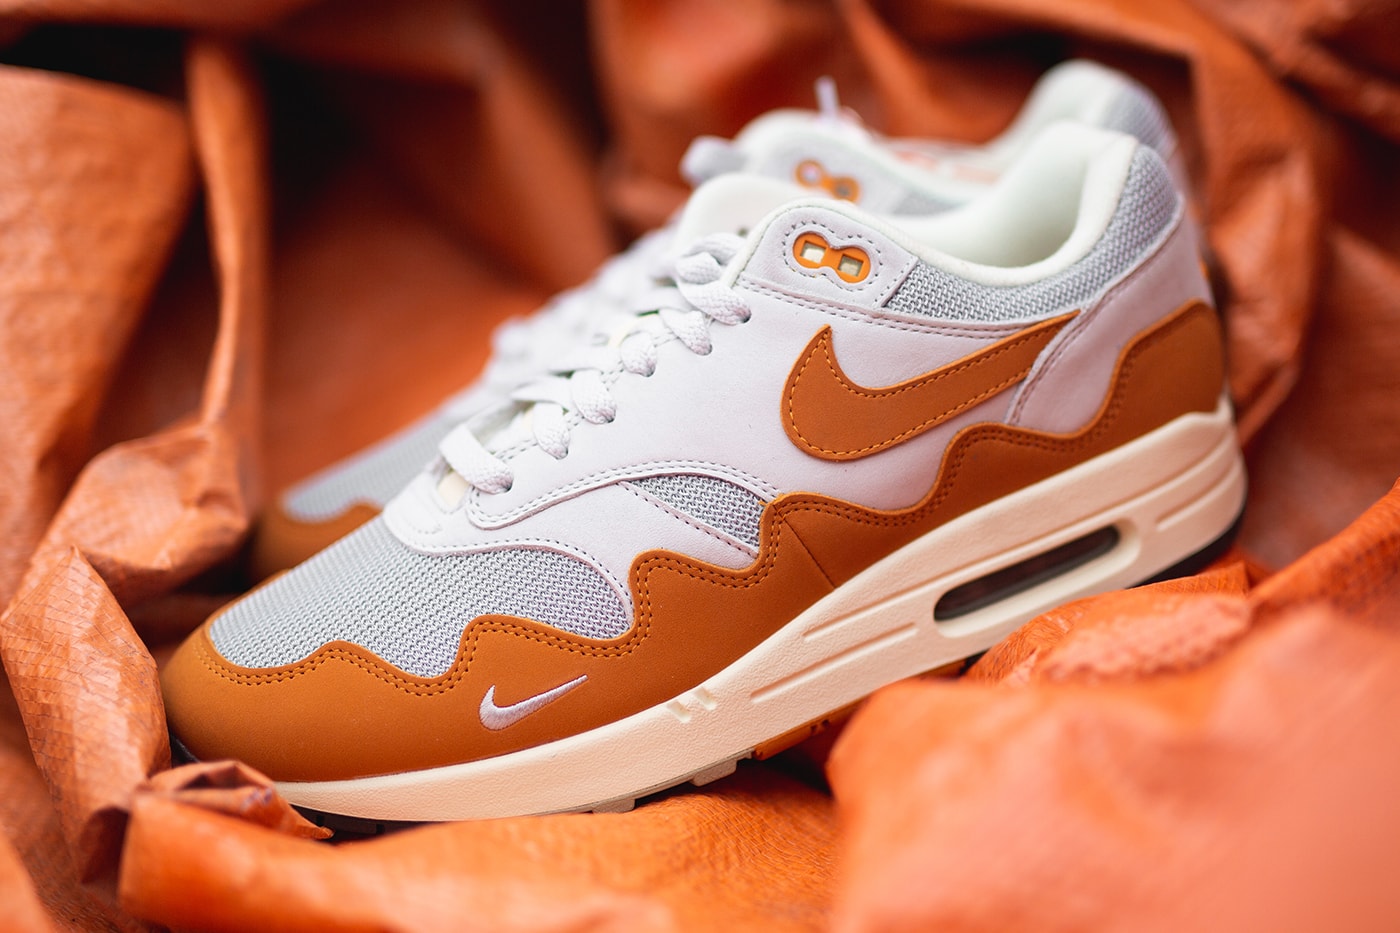 Patta Nike Air Max 1 "Monarch" Closer Look Release Info DH1348-001 Date Buy Price 